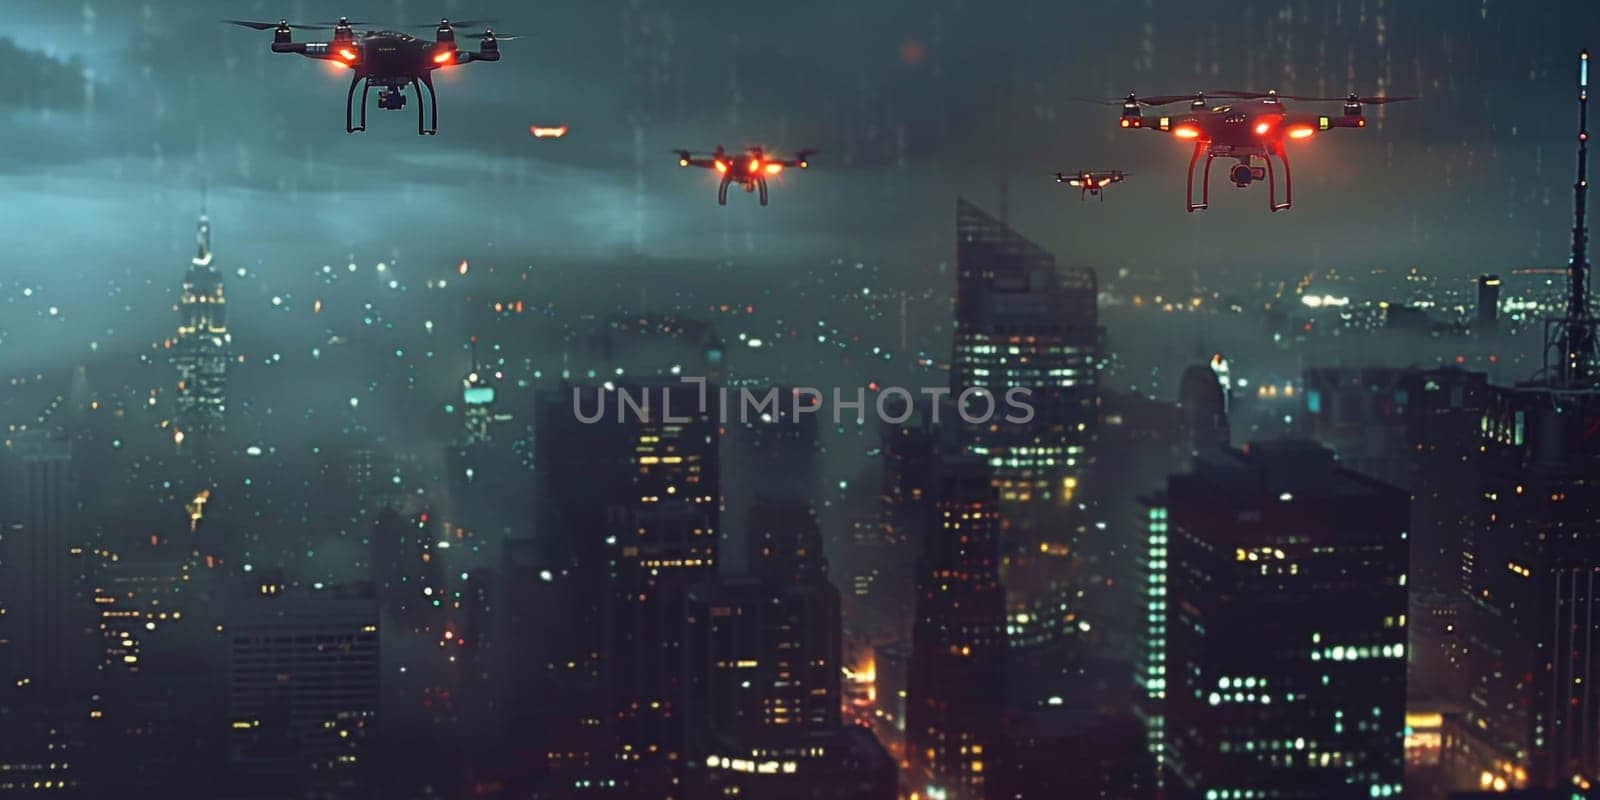 3D Jet plane emitting hot flames and embers over a city. High quality photo